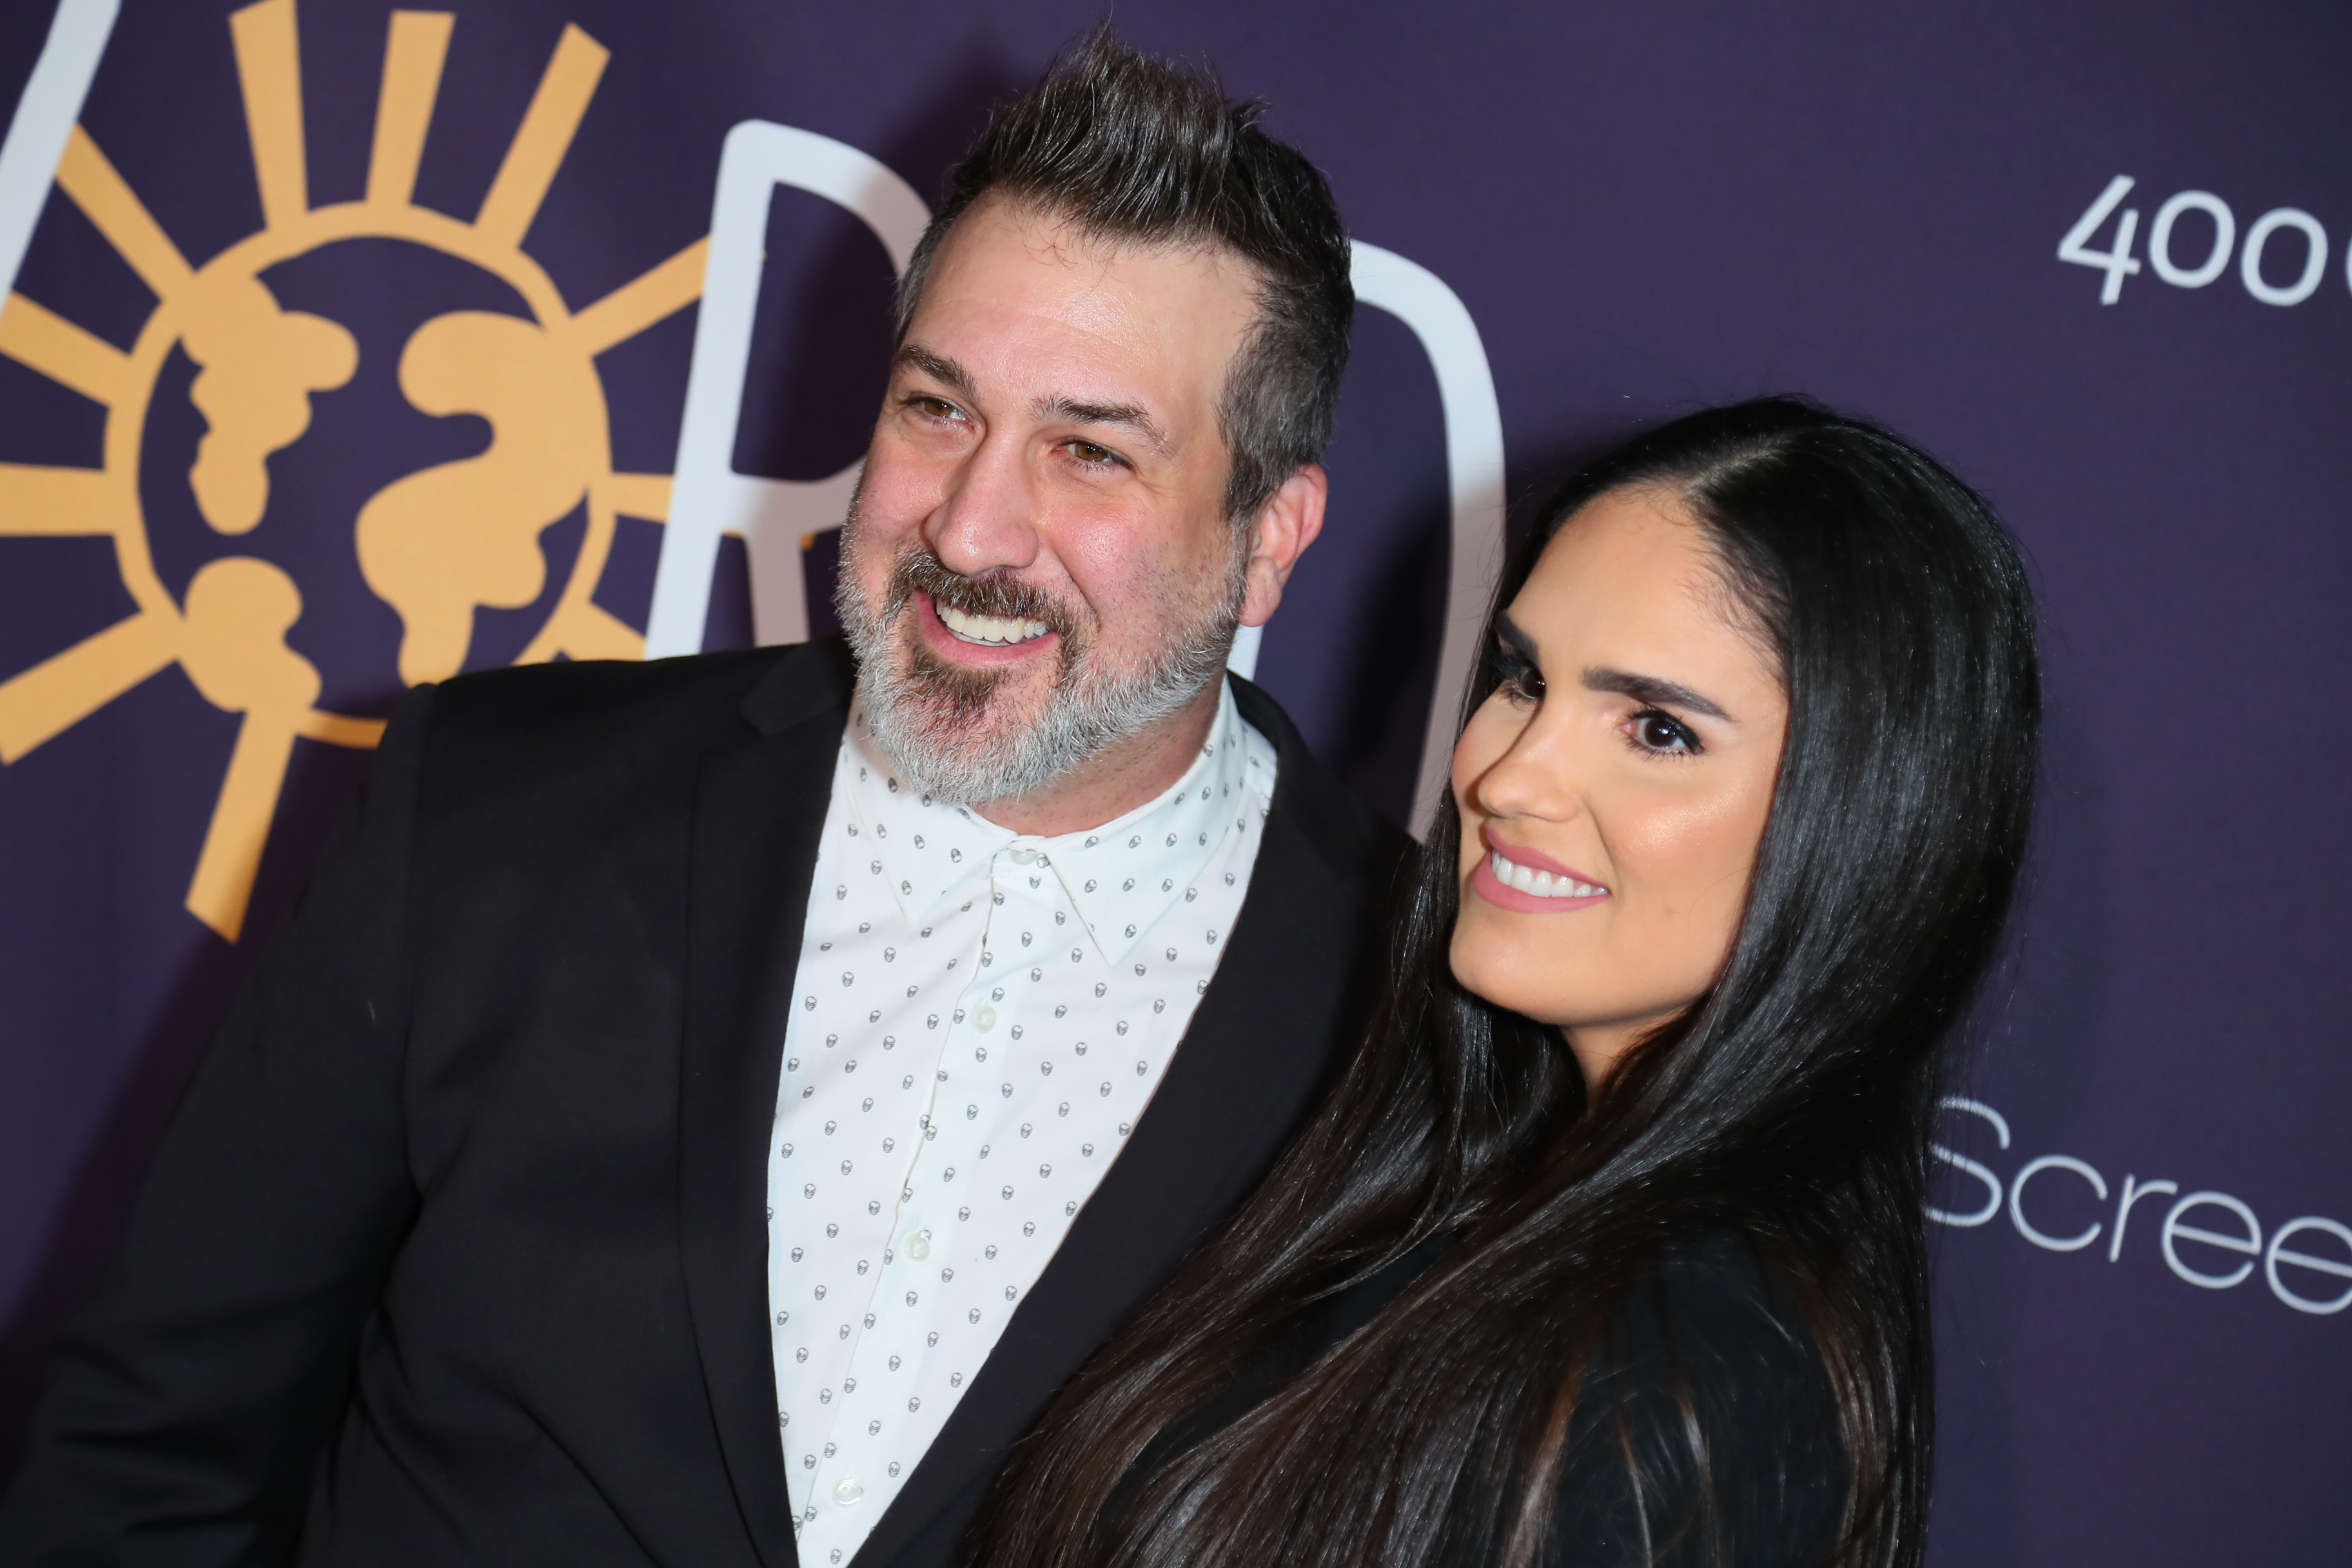 Joey Fatone and Izabel Araujo attend the "Now Apocalypse" premiere at Hollywood Palladium on February 27, 2019 in Los Angeles, California. | Source: Getty Images